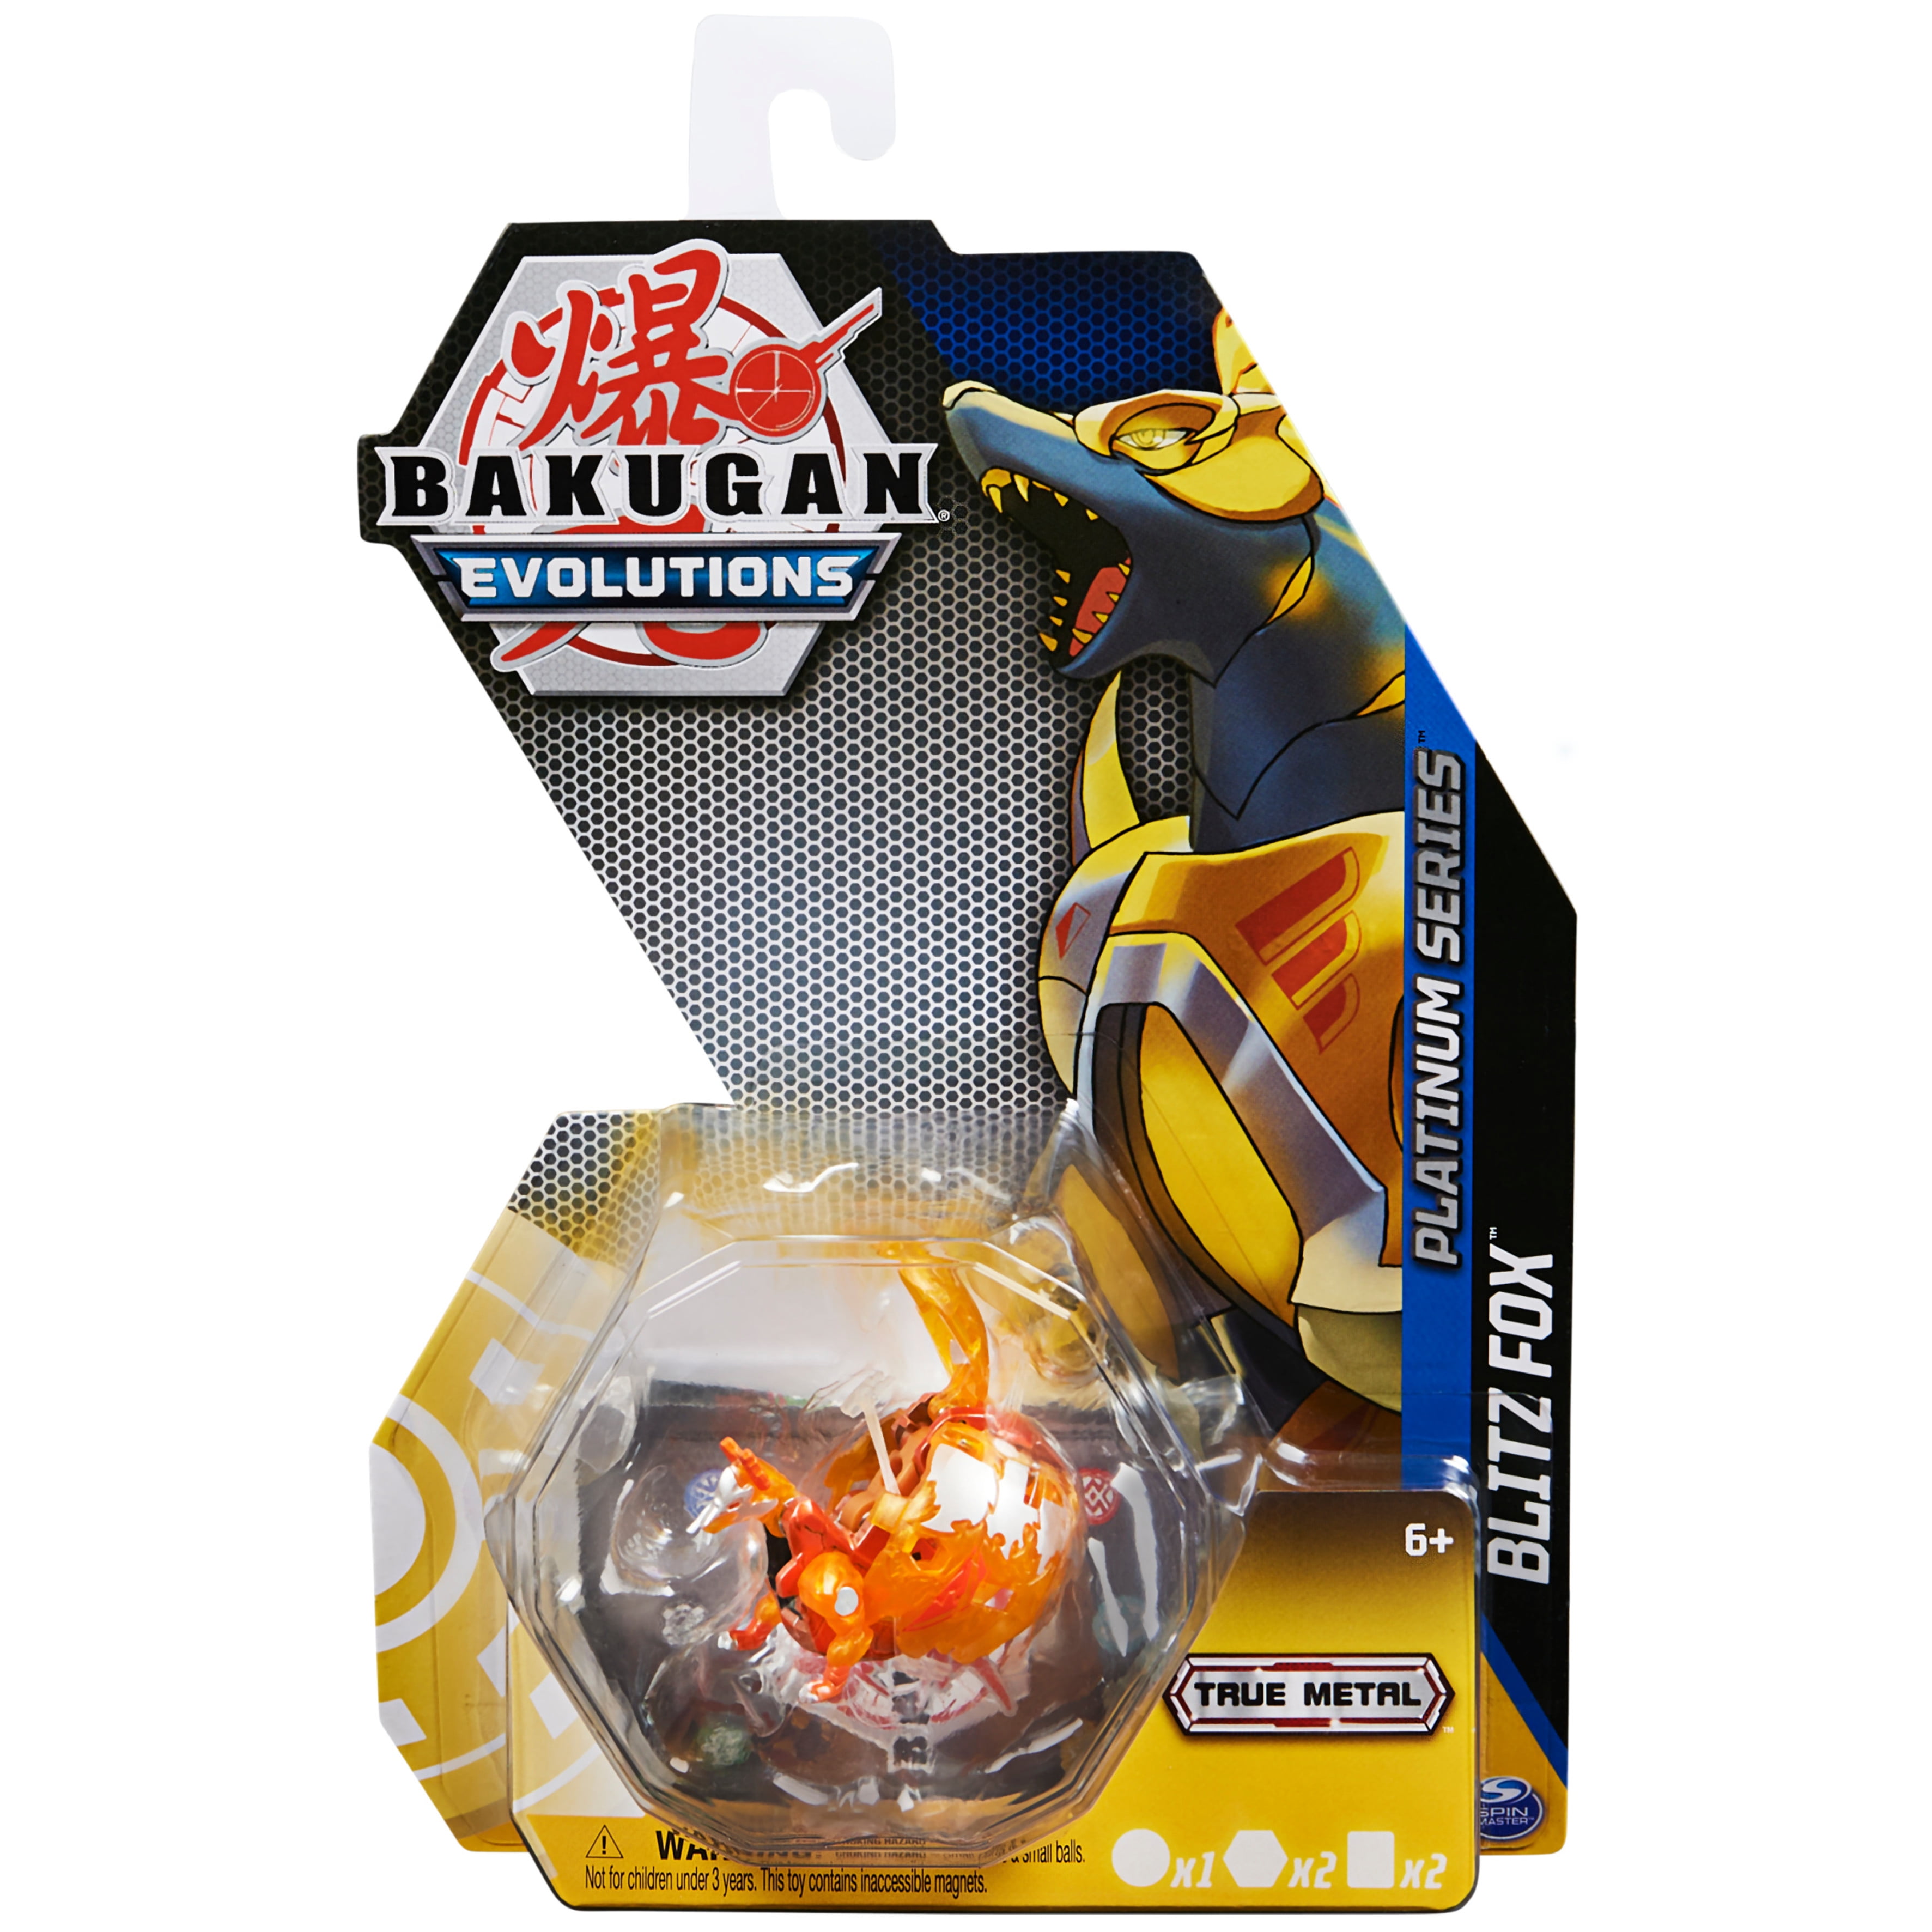 BAKUGAN Legends, Platinum Series True Metal, 2 BakuCores, Gate and  Character Card, Kids' Toys for Boys, Ages 6 and Up Styles May Vary